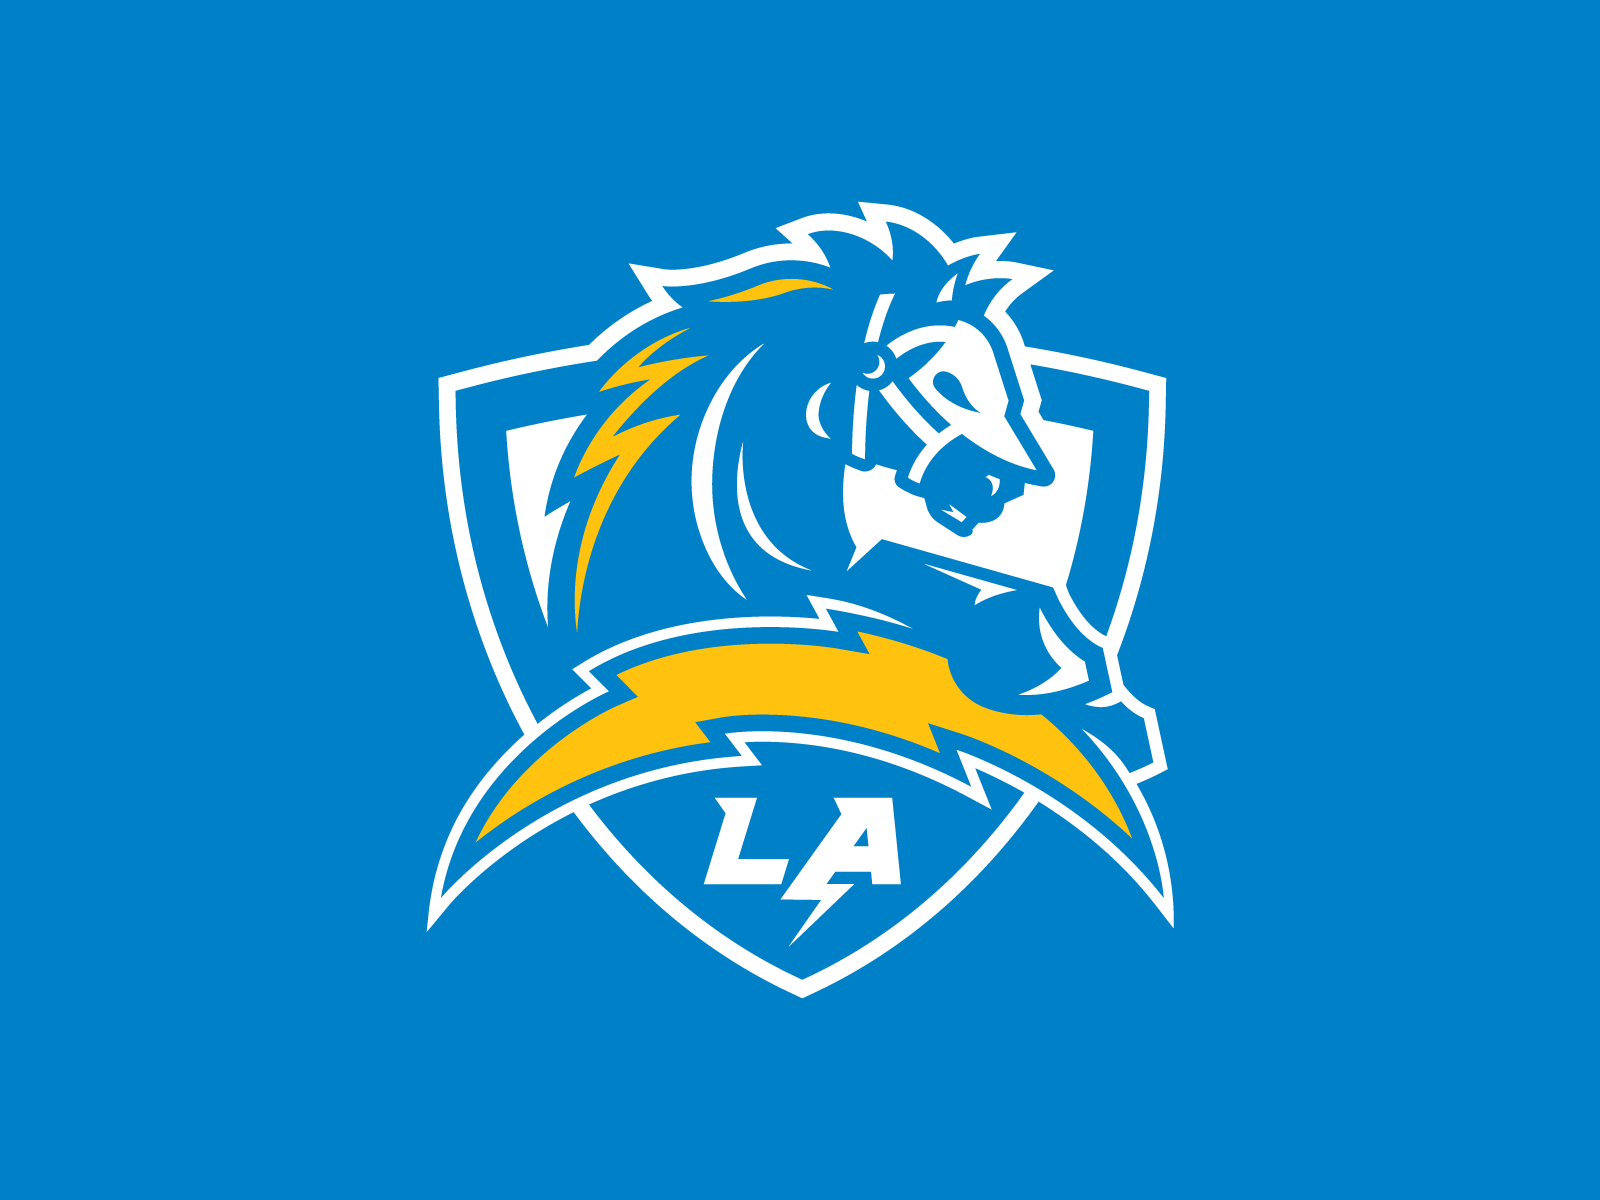 Download Updated Chargers Concept Logo by Sean McCarthy on Dribbble